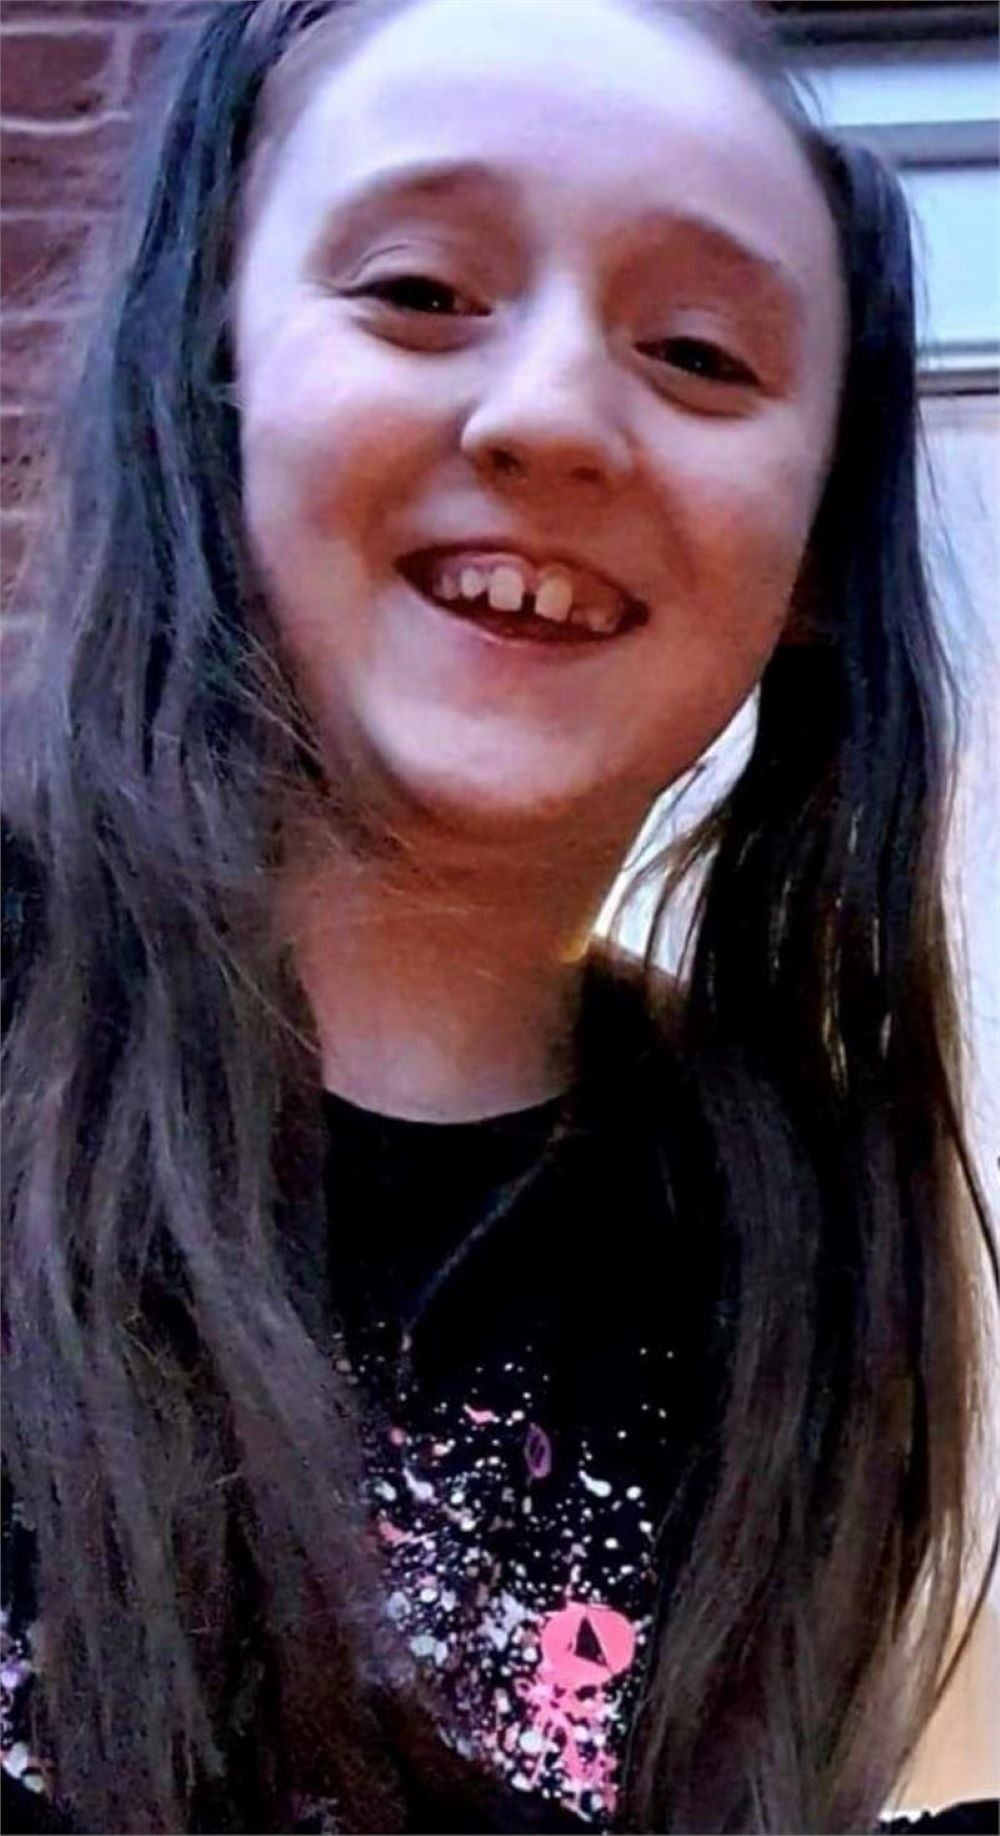 Leona Peach, 12, is missing from her home in Newton Abbot (Devon and Cornwall Police/PA)